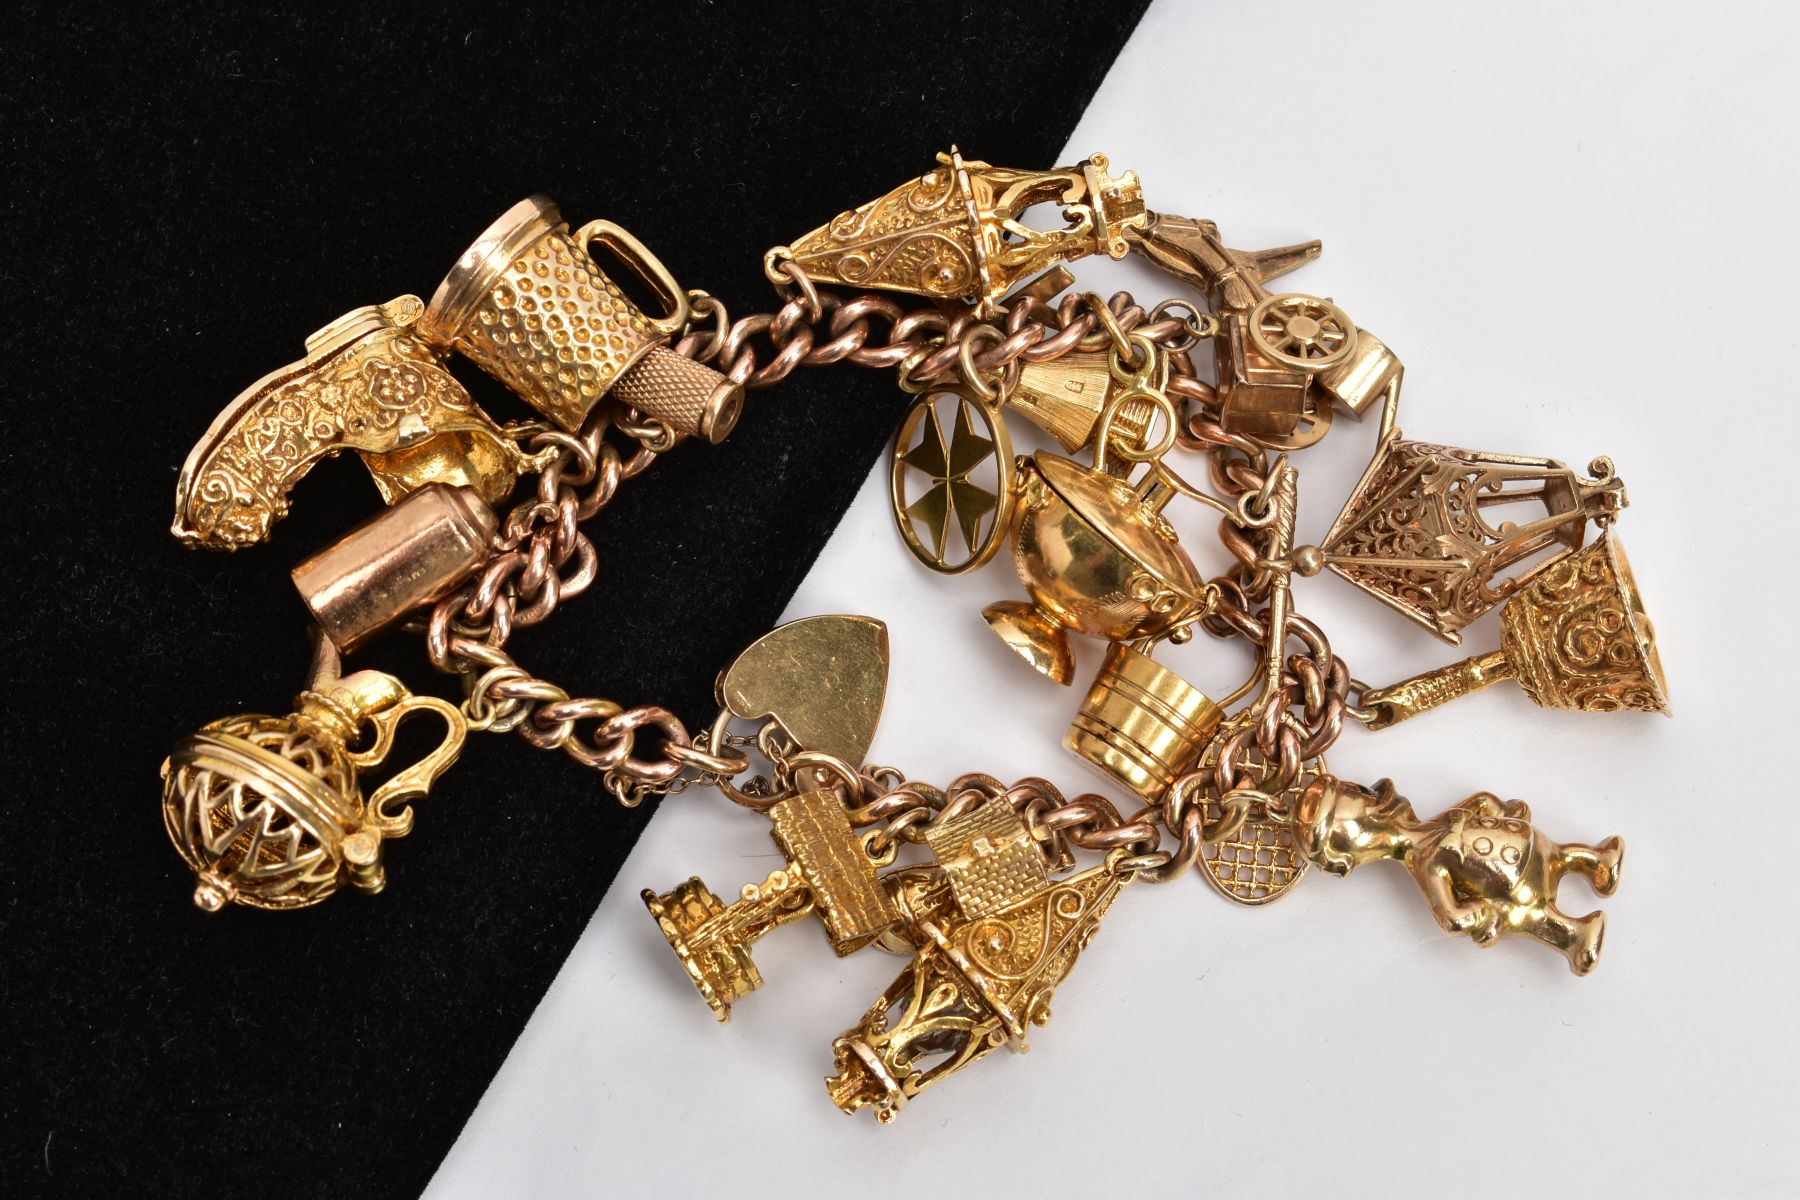 A HEAVY YELLOW METAL CHARM BRACELET, suspending nineteen charms in forms such as a wishing well, - Image 2 of 2